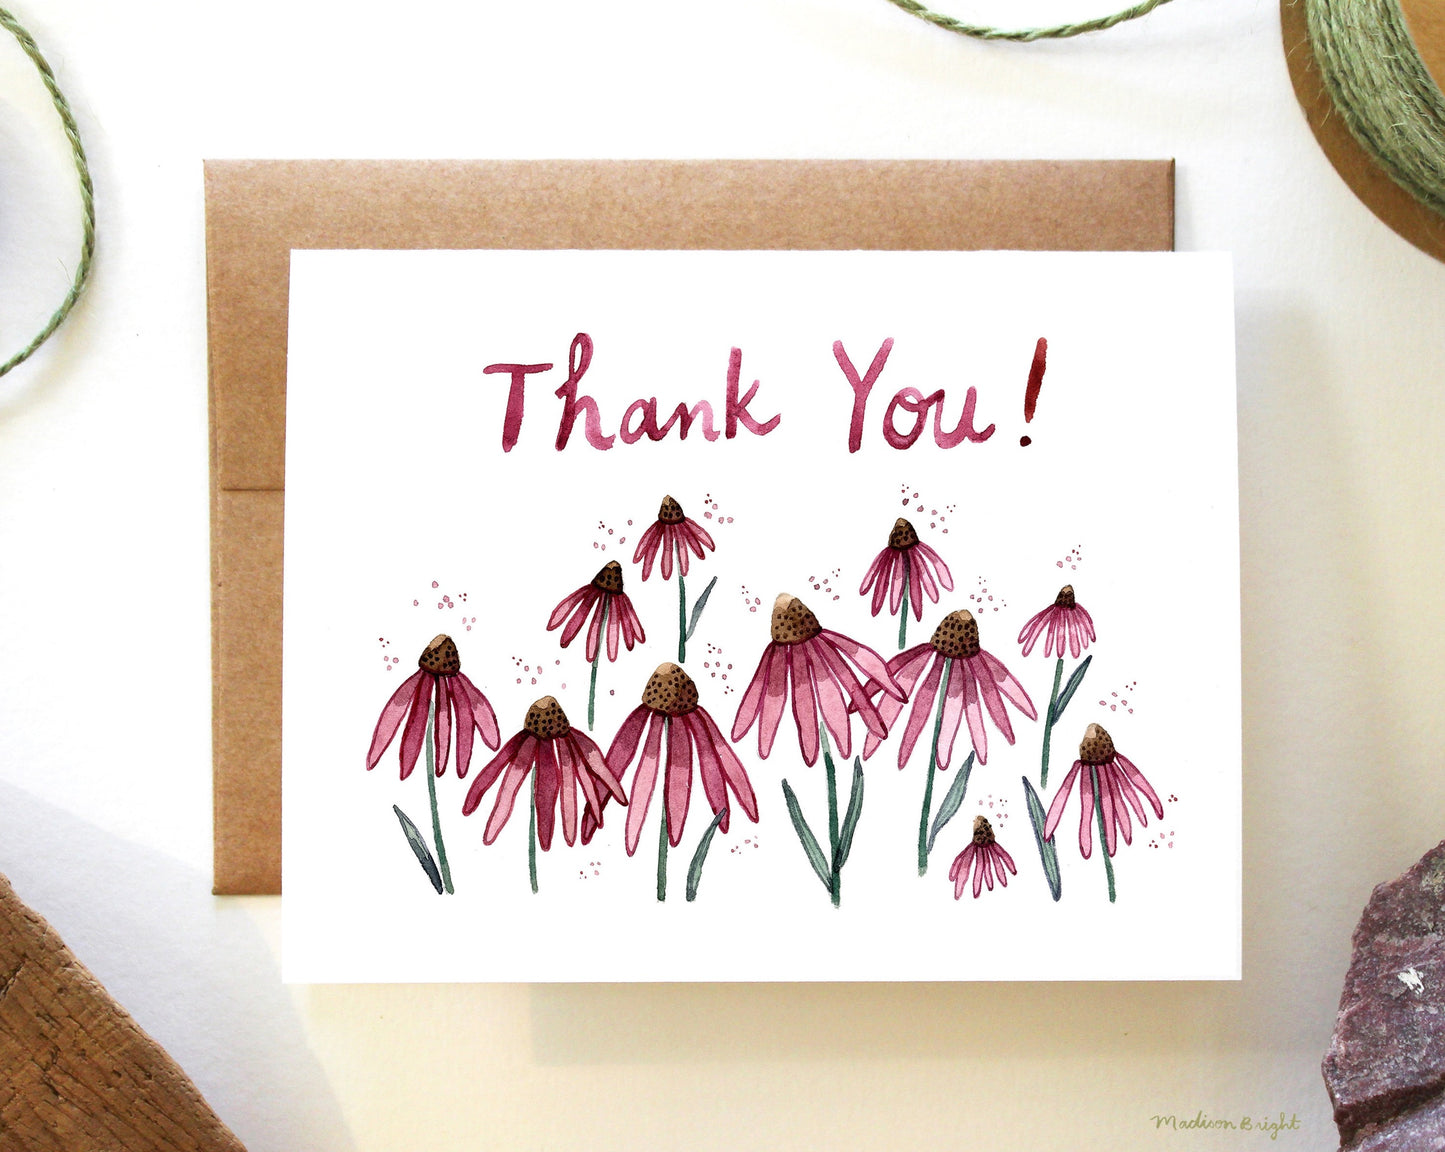 "Thank You!" Echinacea Flowers - Greeting Card